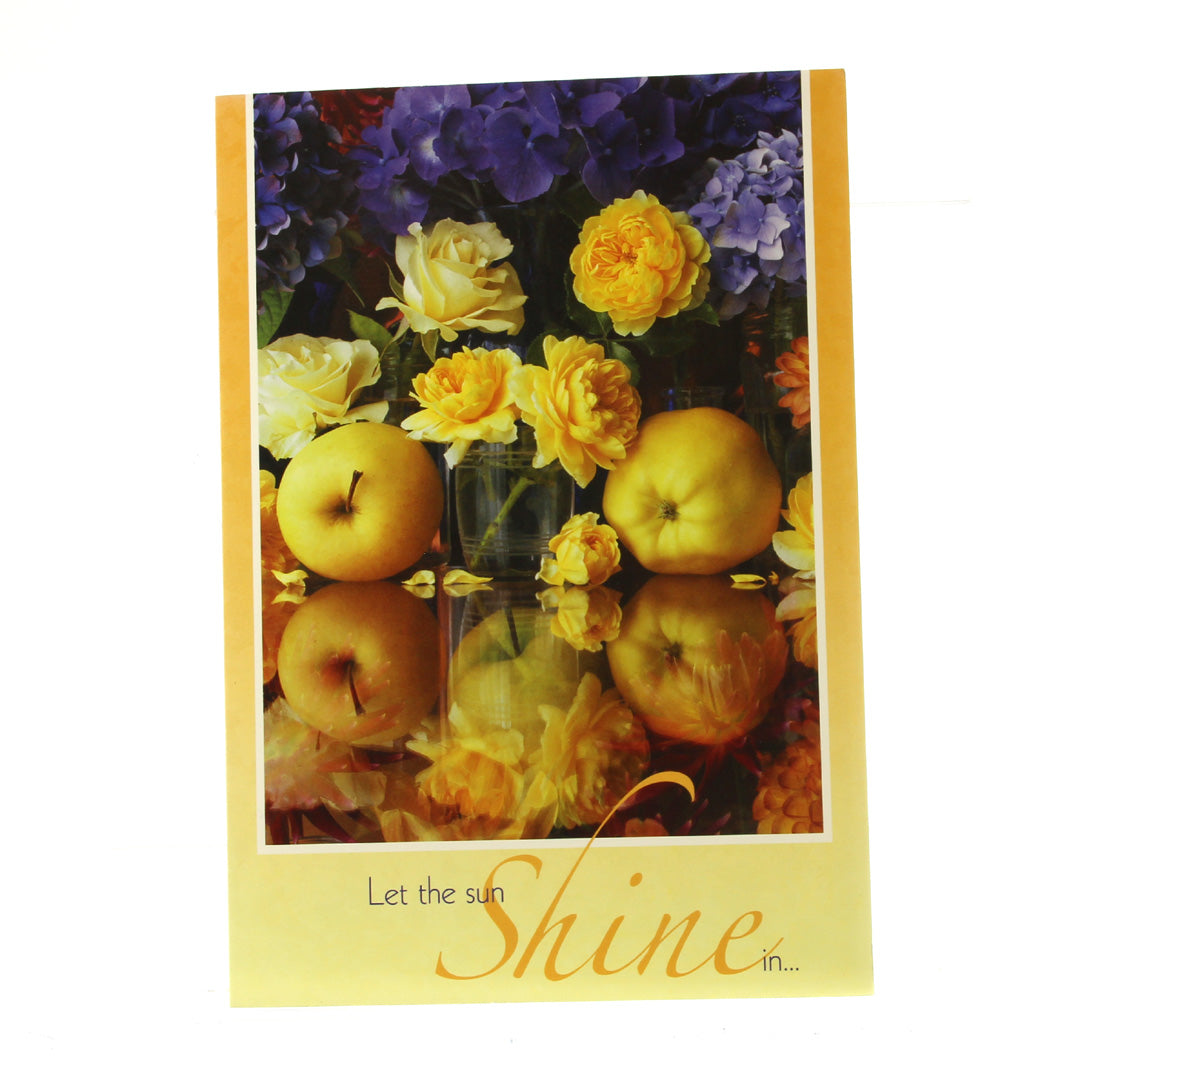 Get Well Card: Let the sun shine in... (Image of apples & flowers)